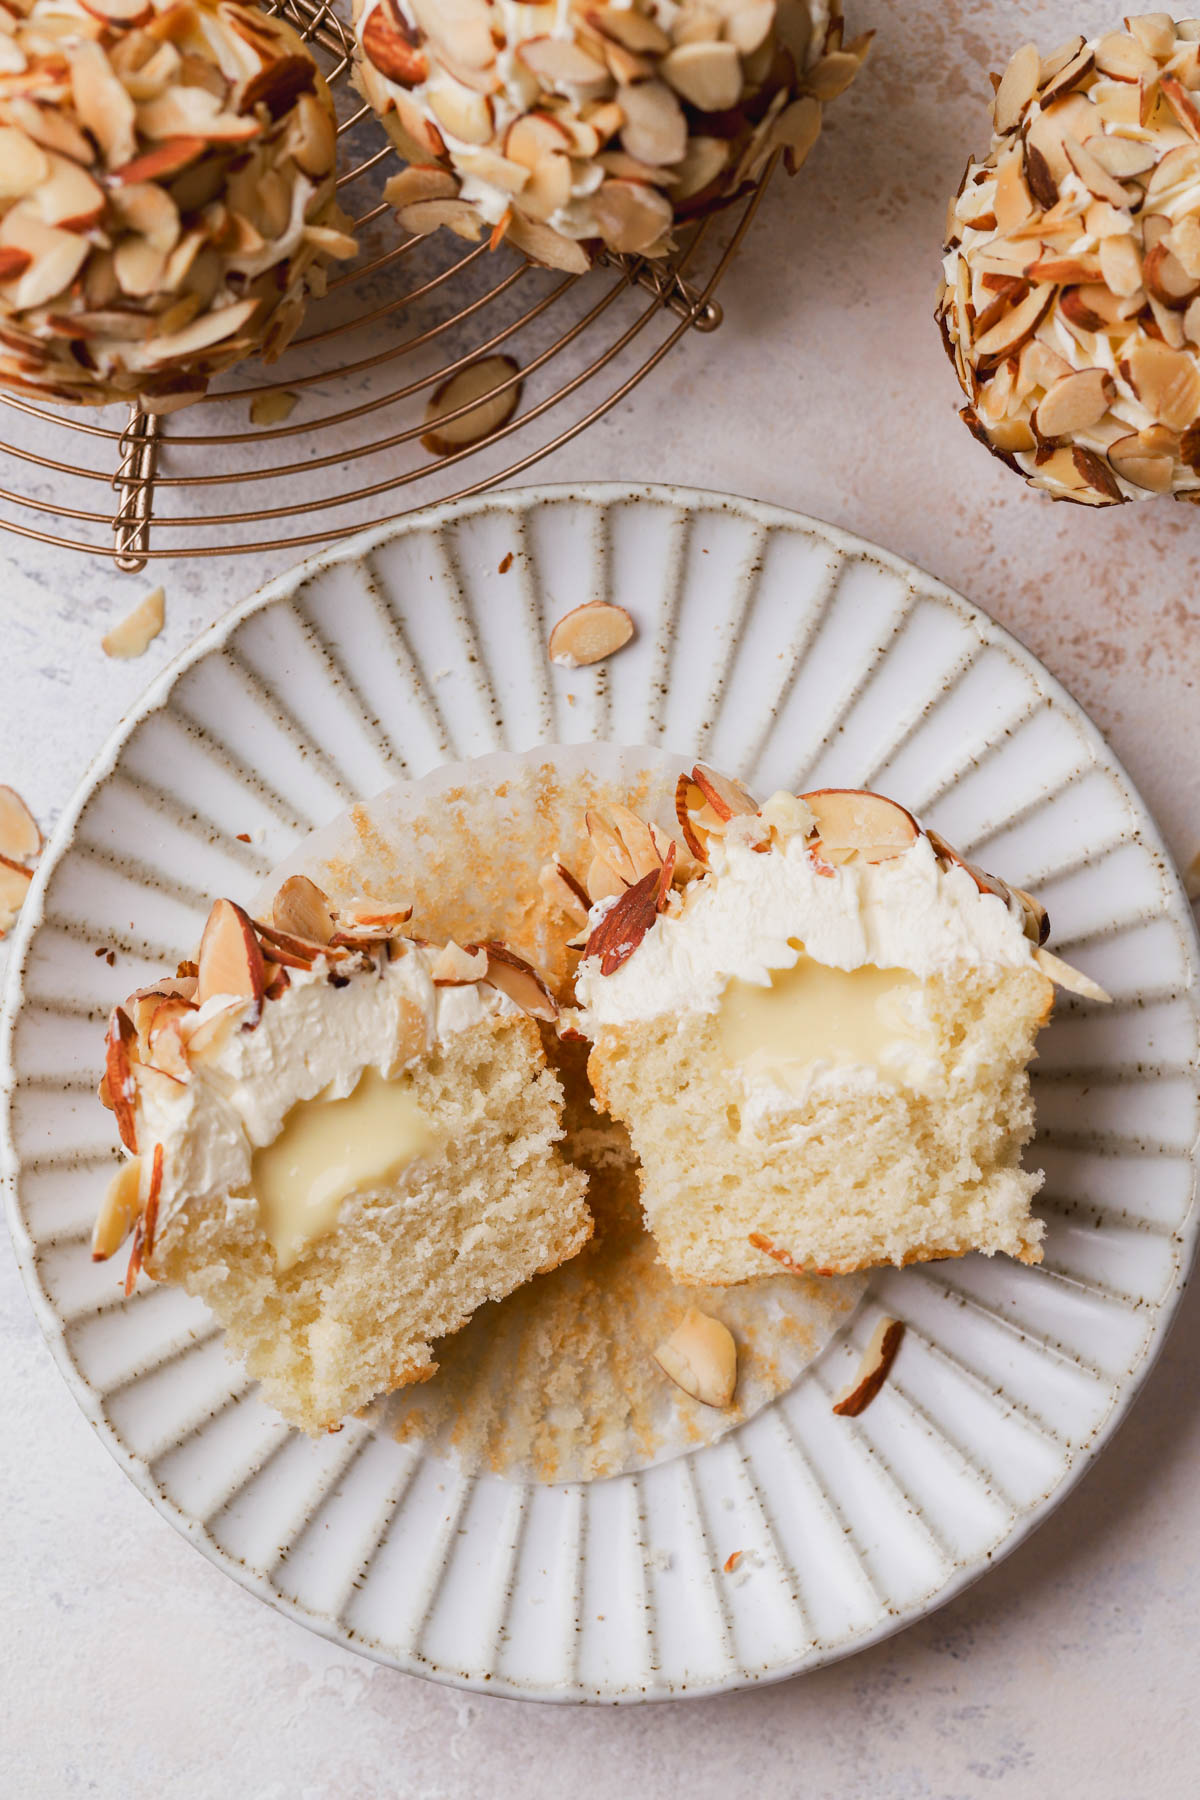 Cupcake flavored with almond extract, filled with vanilla custard, German buttercream and toasted almonds.  